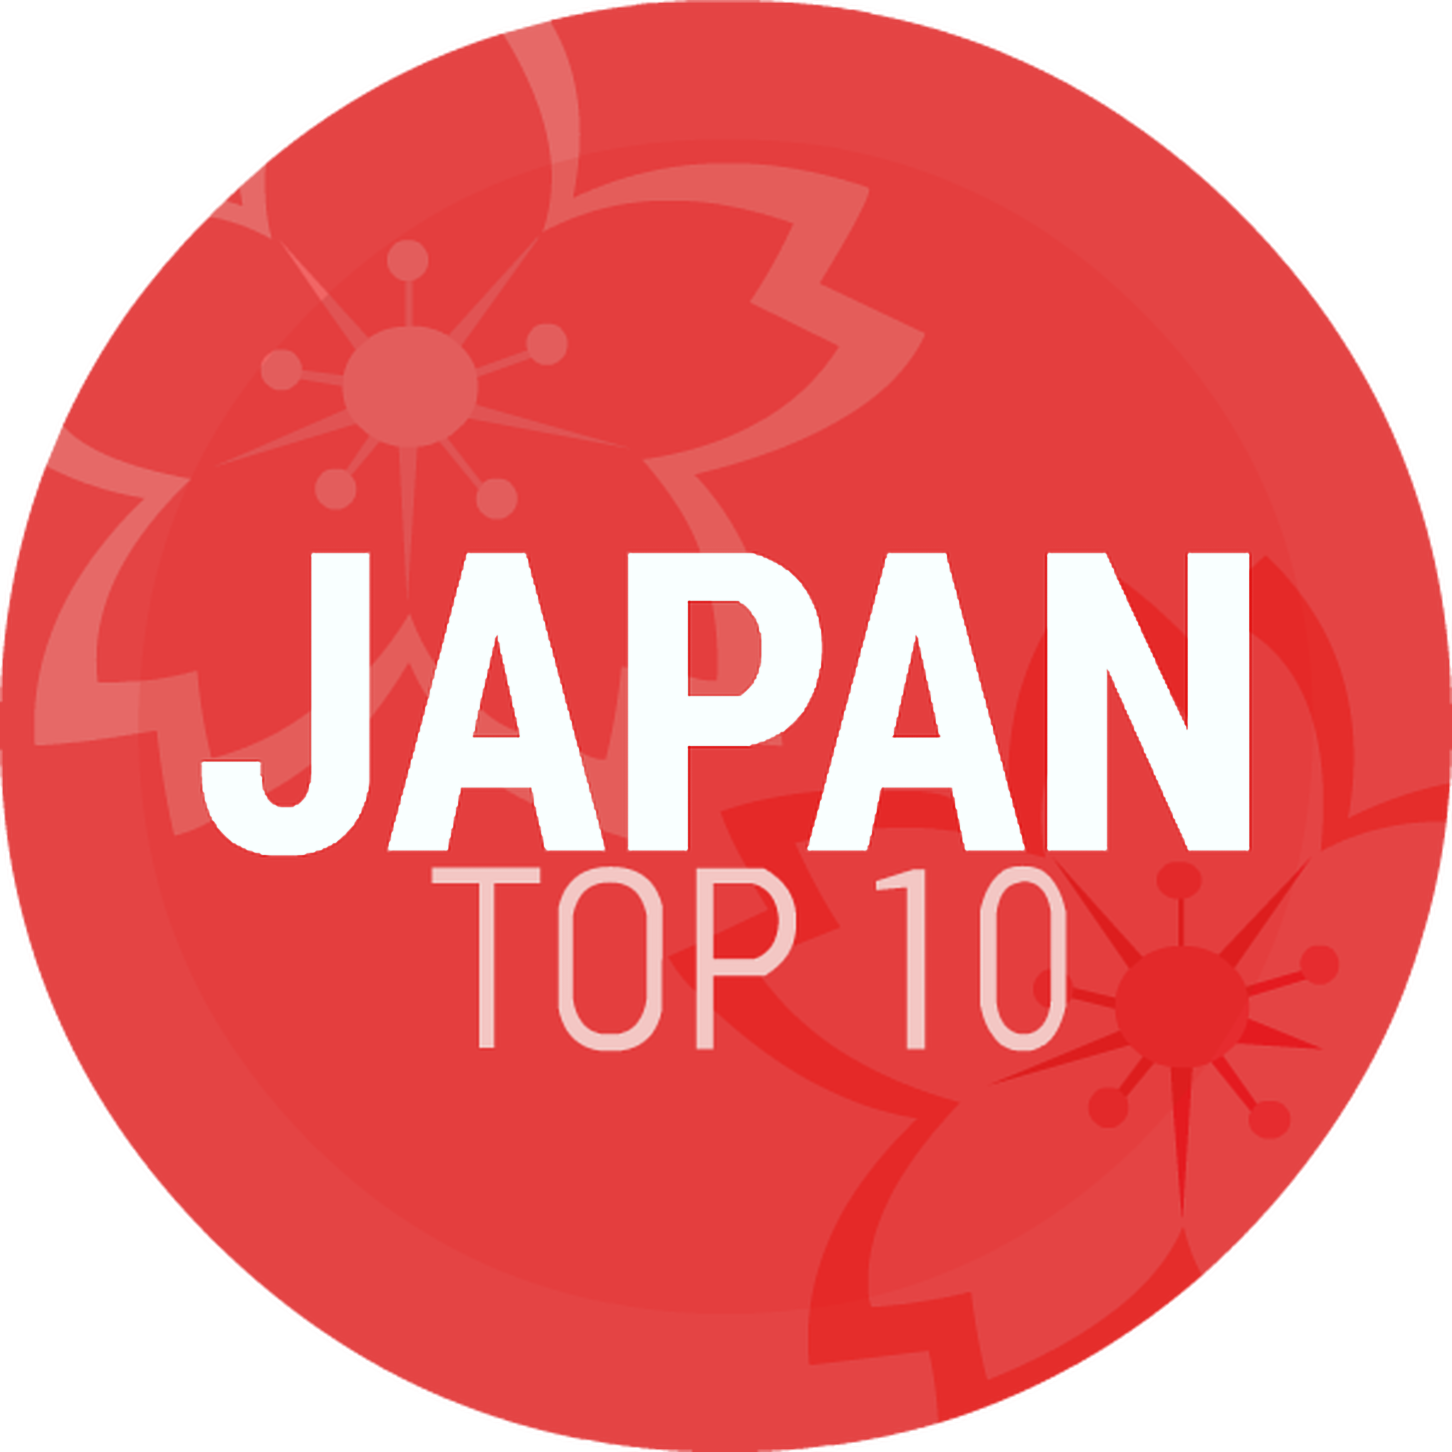 Episode 311: Japan Top 10 February 2020 Countdown